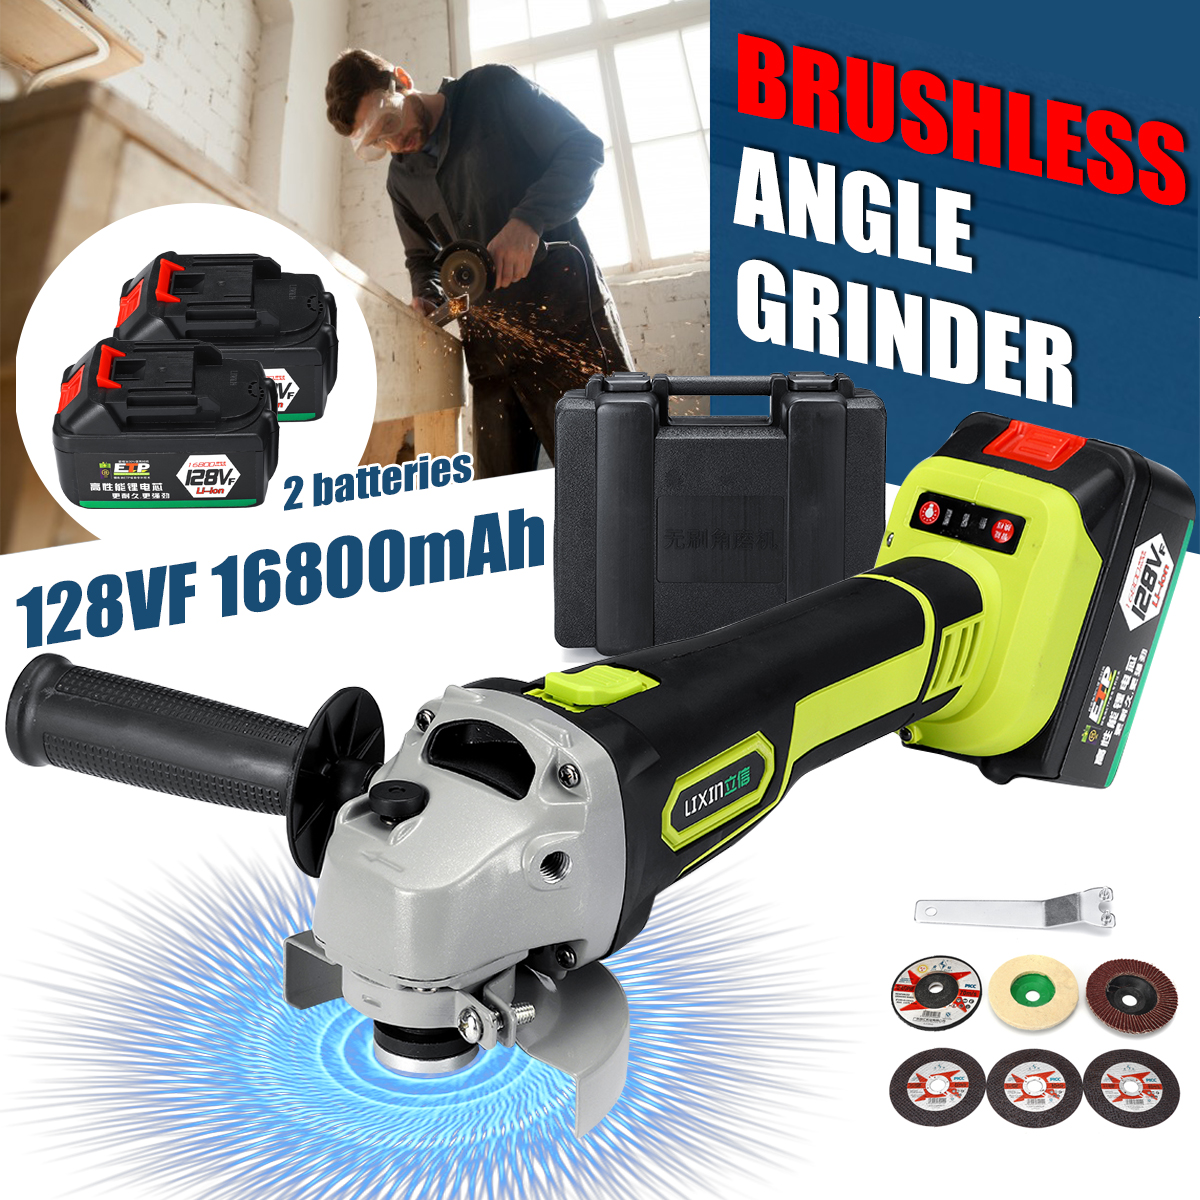 128VF 16800mAh Cordless Electric Angle Grinder Brushless Power Cutting Angle Grinding Tool with Li-ion Battery& Charger